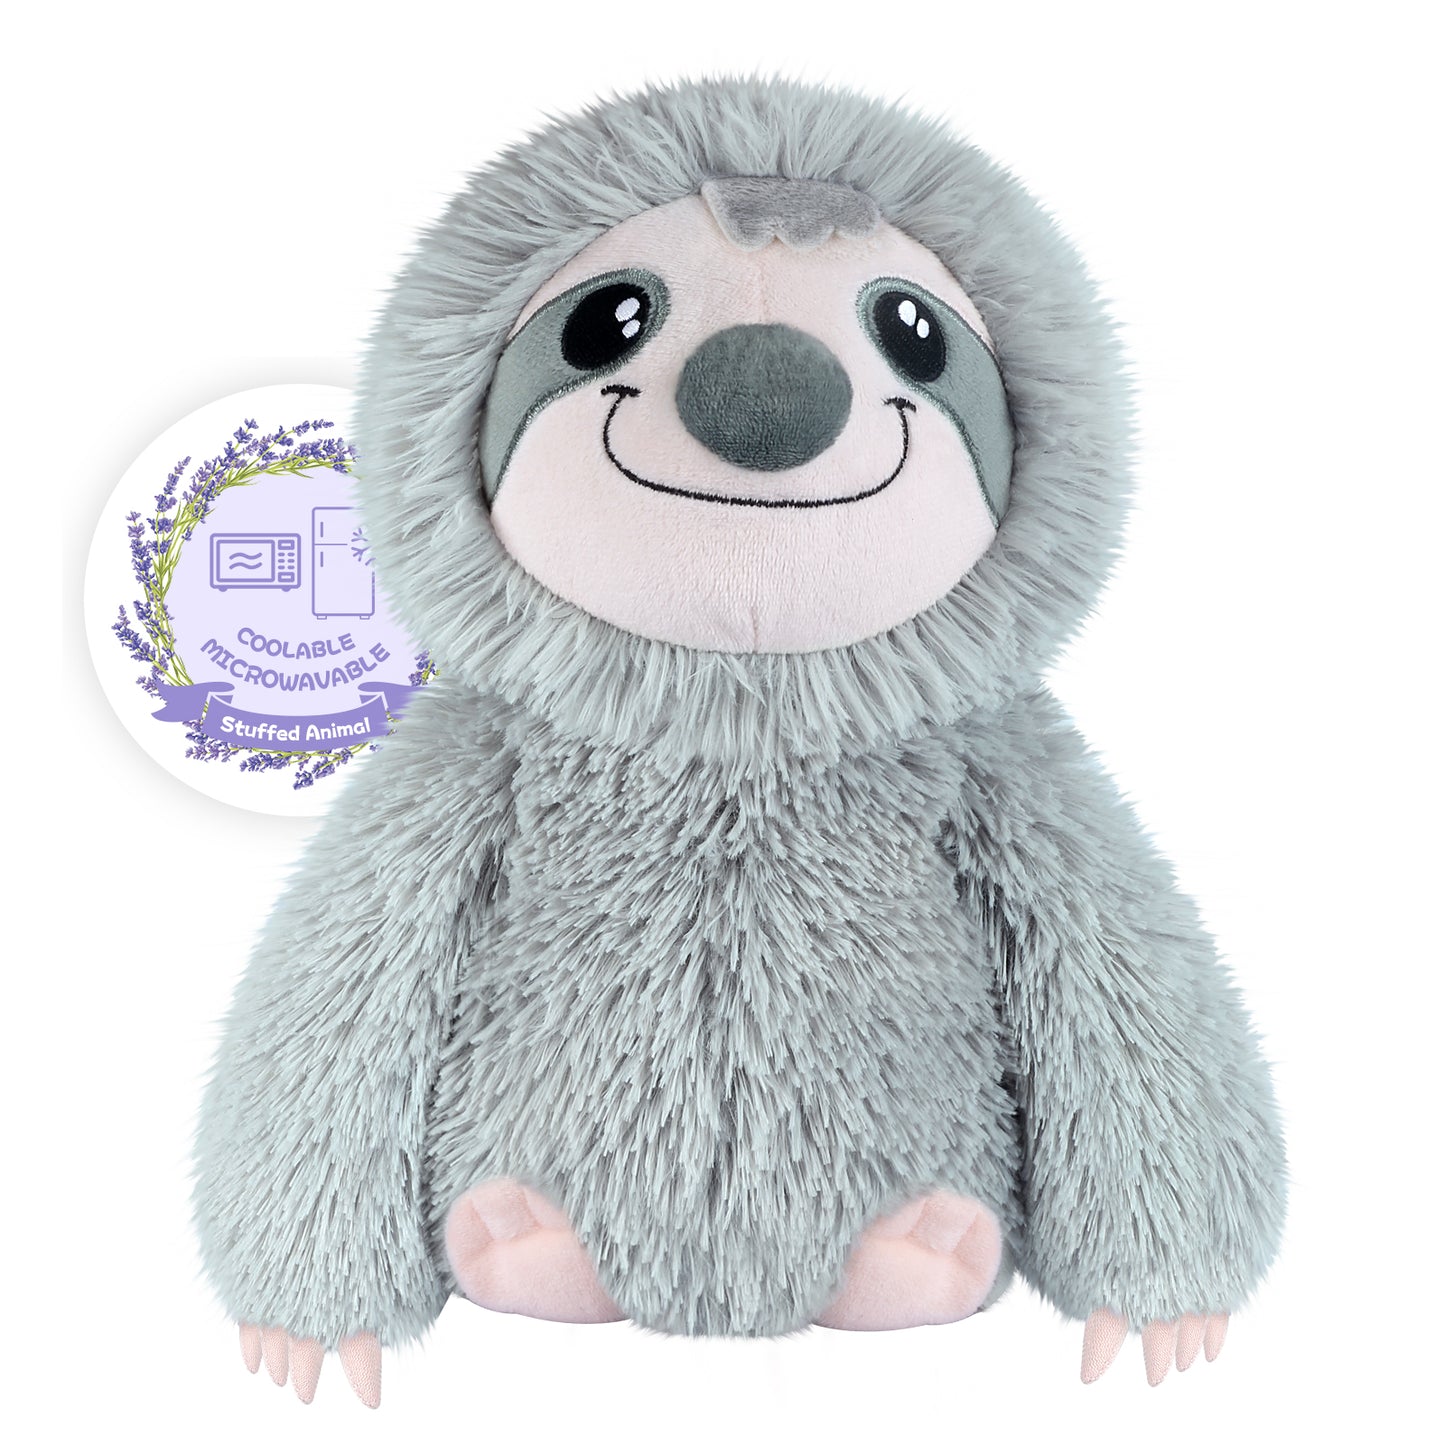 SuzziPals Coolable Heatable Sloth Stuffed Animal, Microwavable Stuffed Animals Heating Pad for Period Cramps